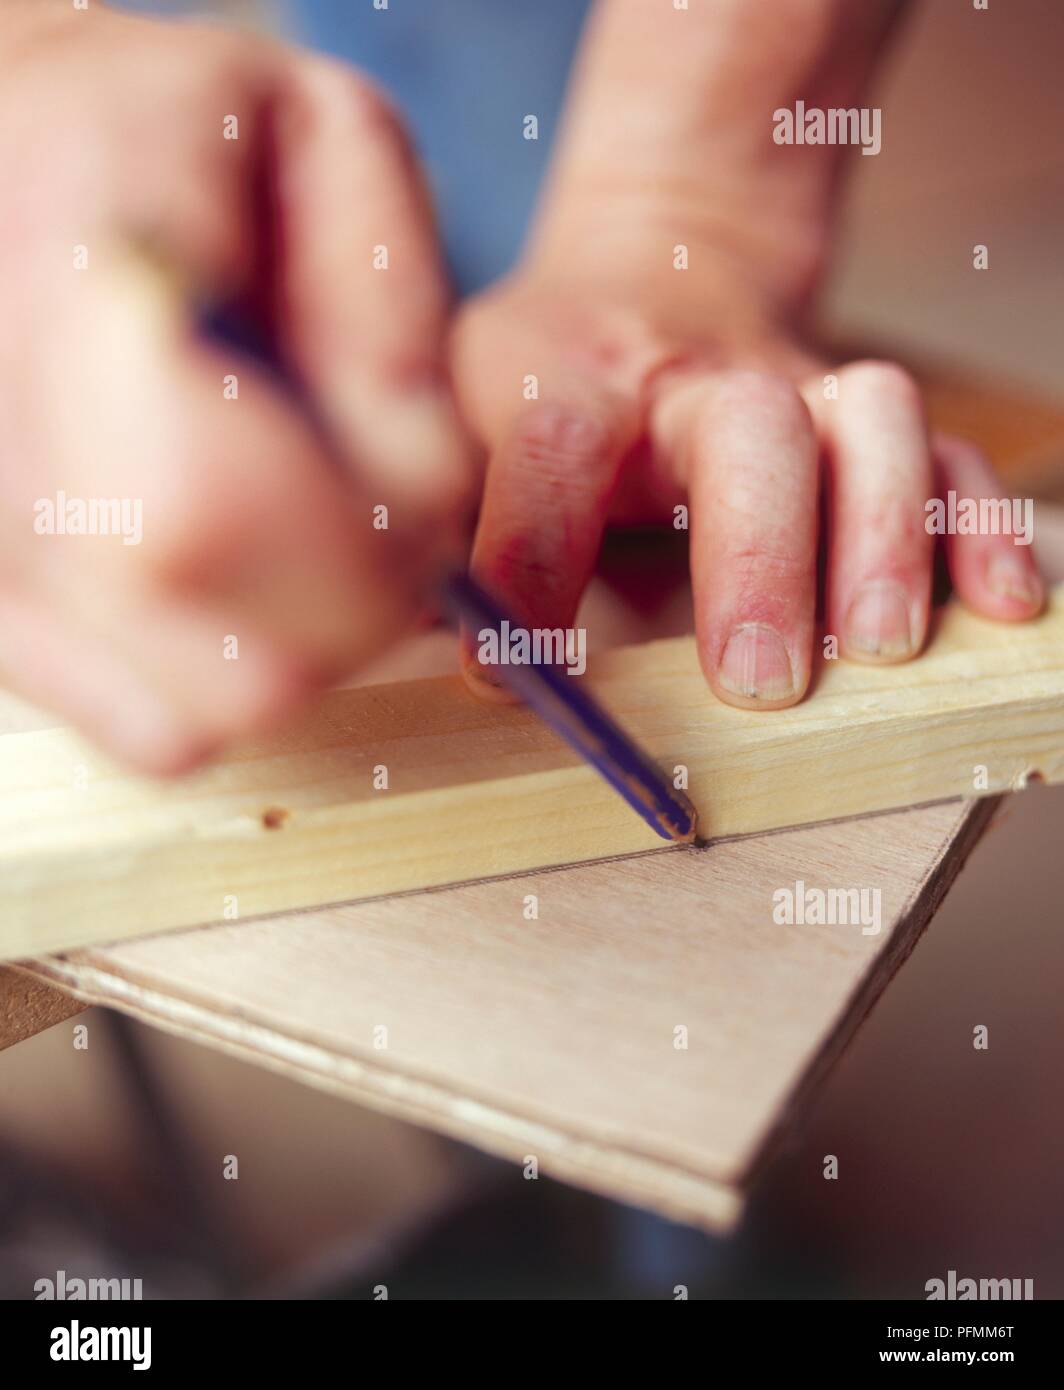 Using a pencil and a piece of wood to mark a diagonal across the corner of a piece of plywood, close-up Stock Photo